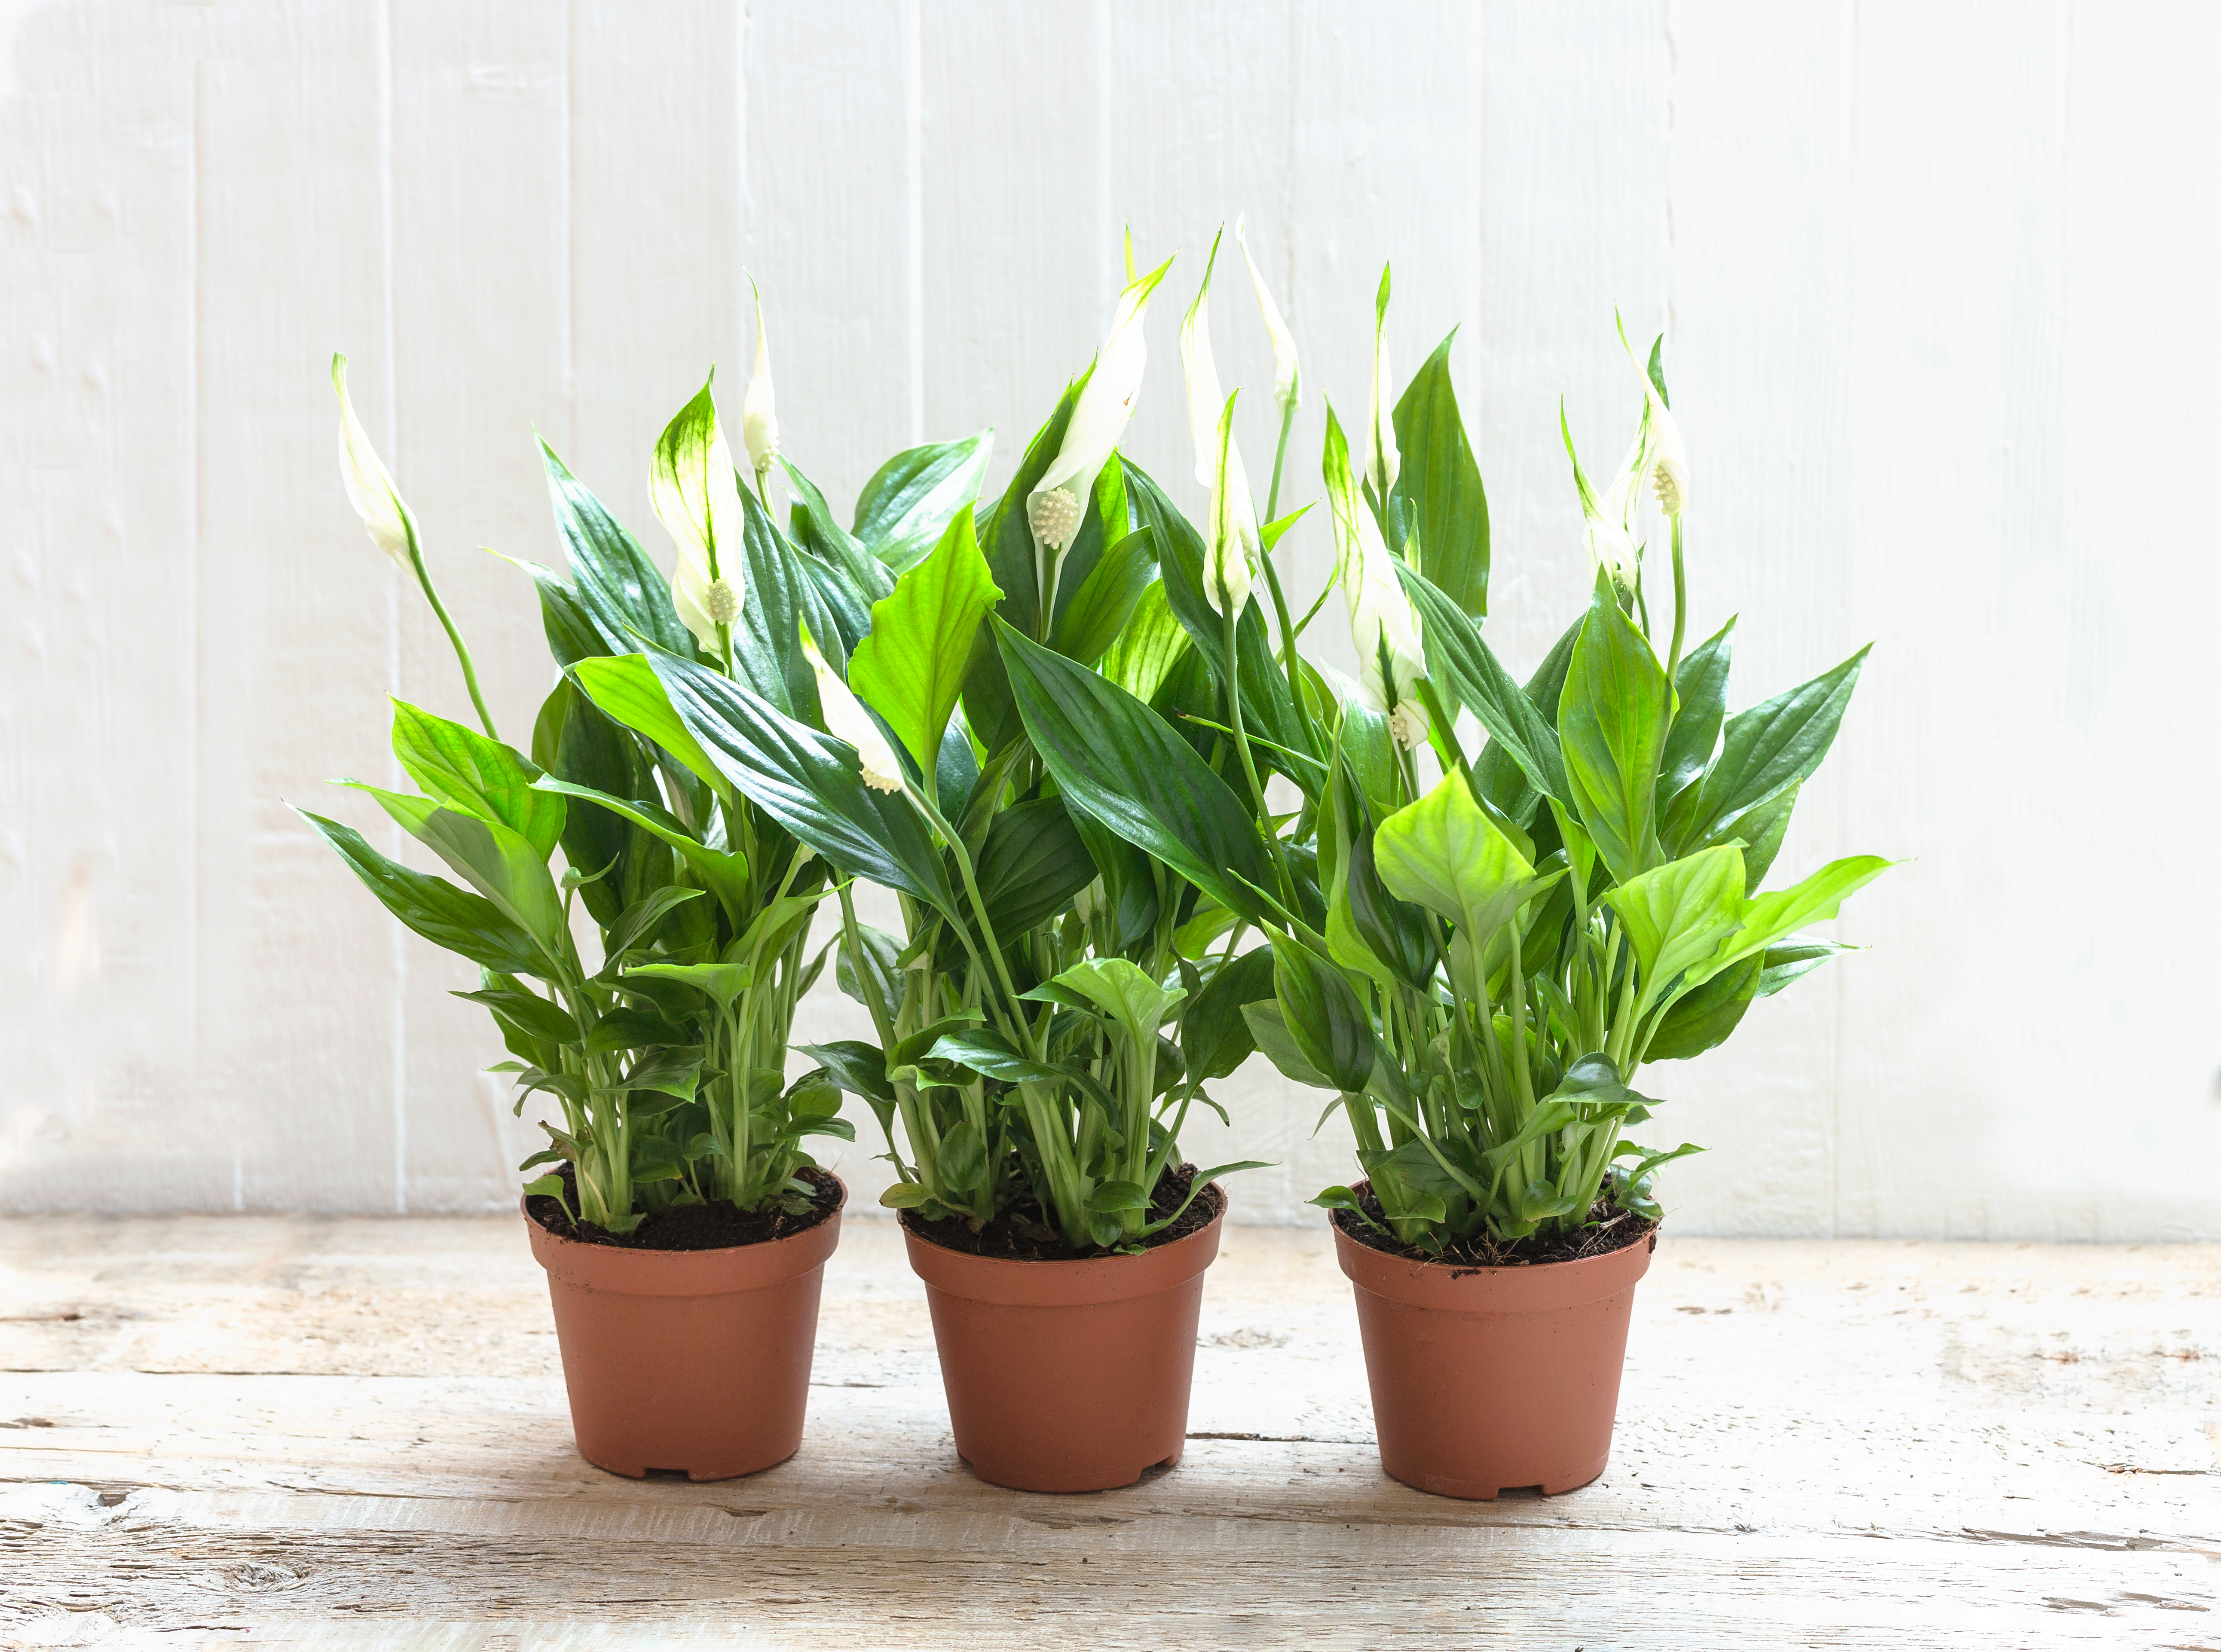 The best way to repot your Peace lily